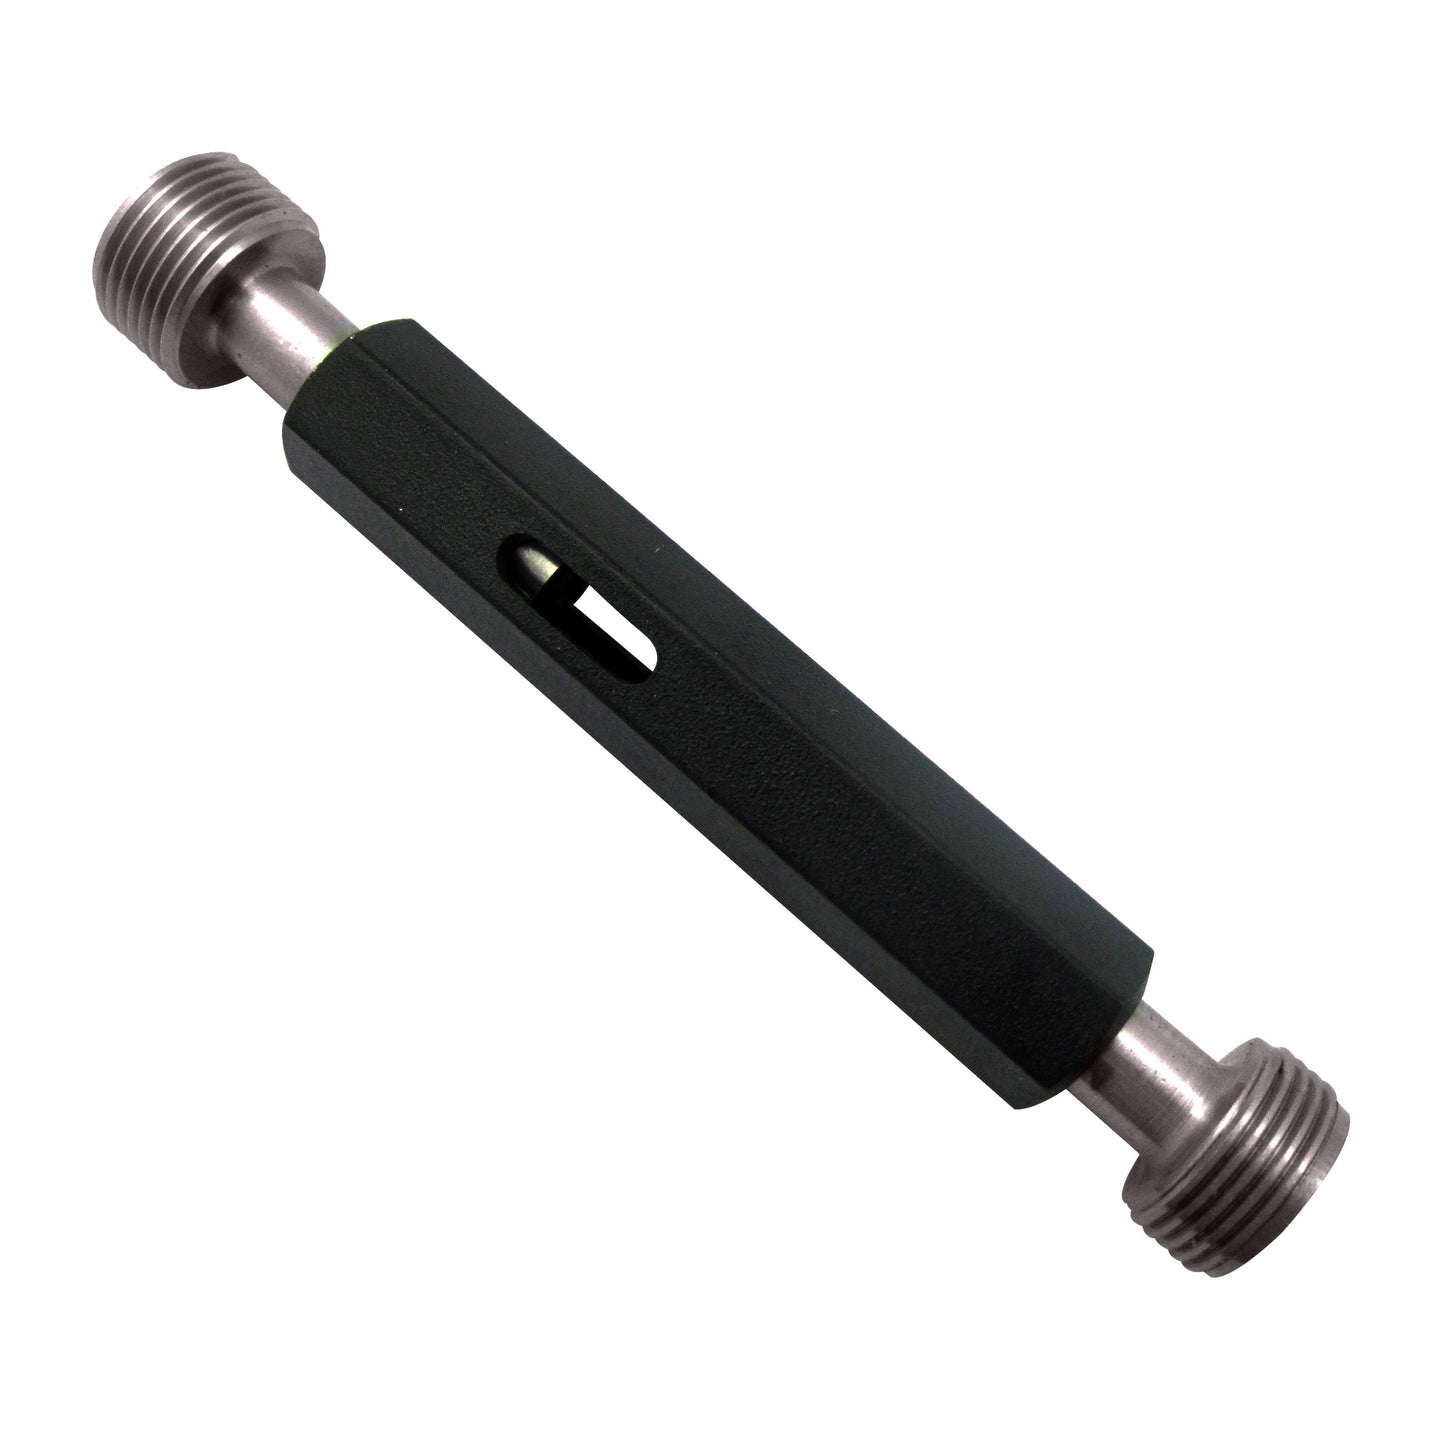 7/8" - 14 Unified Right Hand Thread Plug Gauge